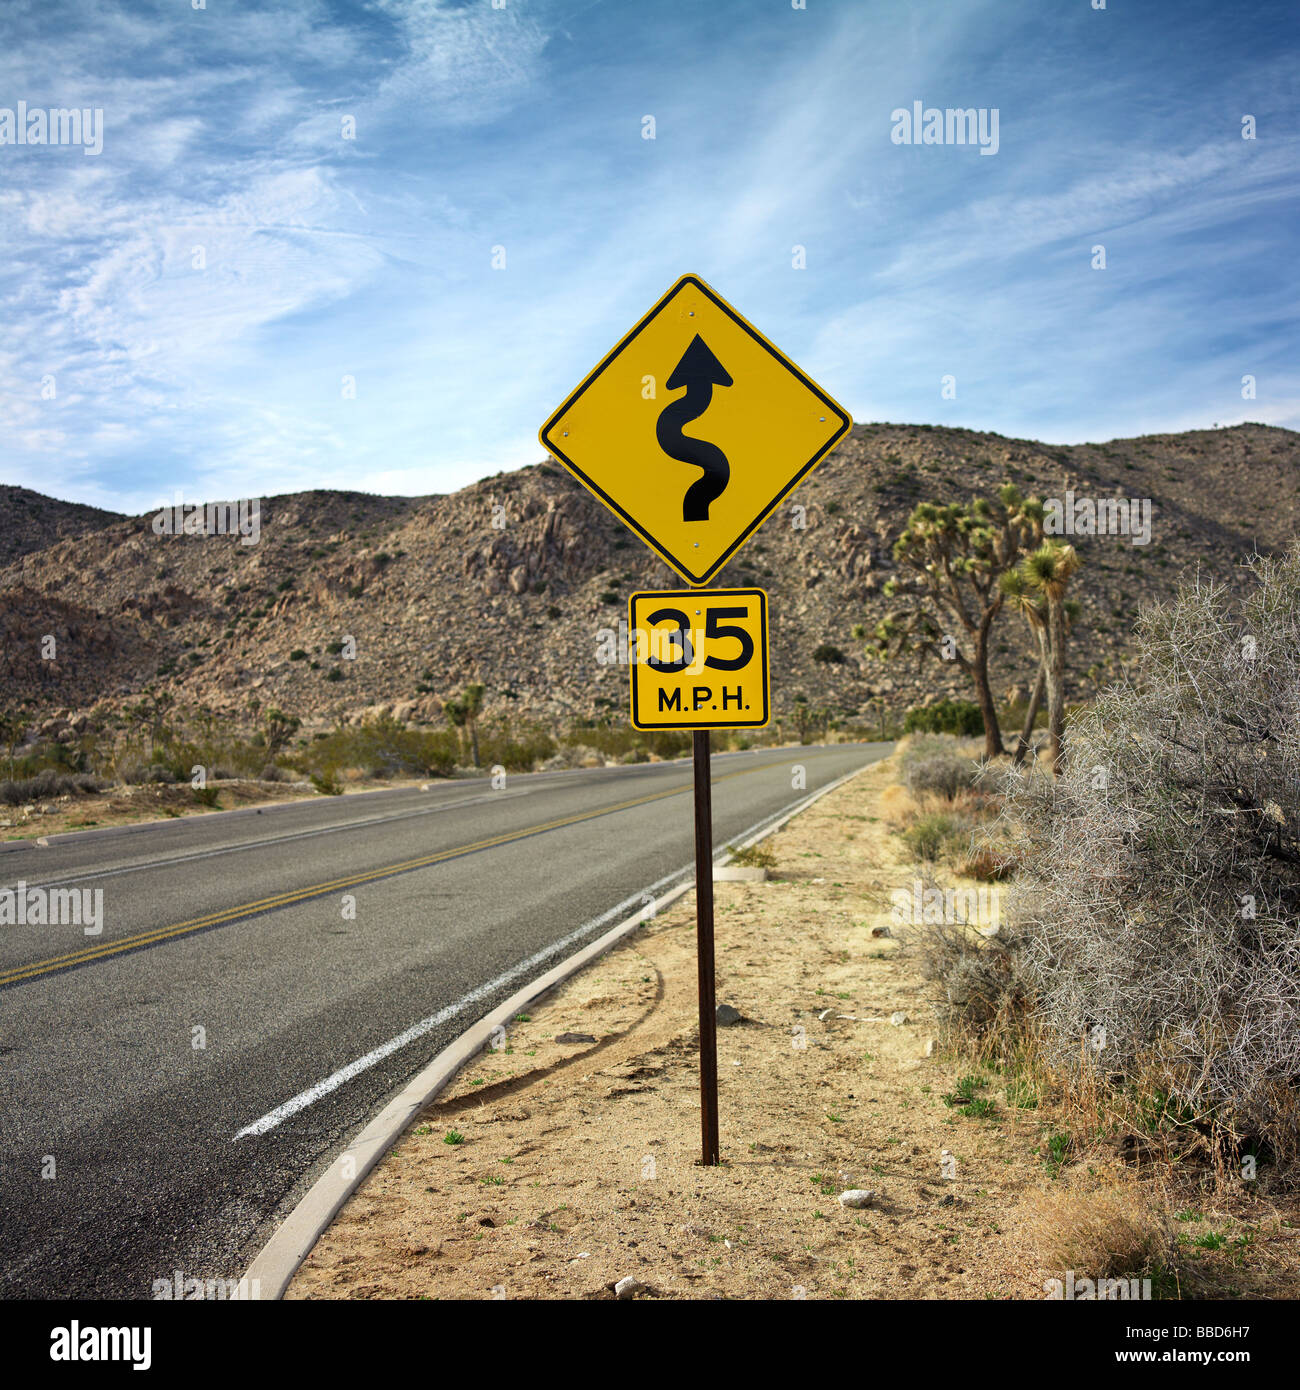 Yellow safety road sign by desert highway Stock Photo